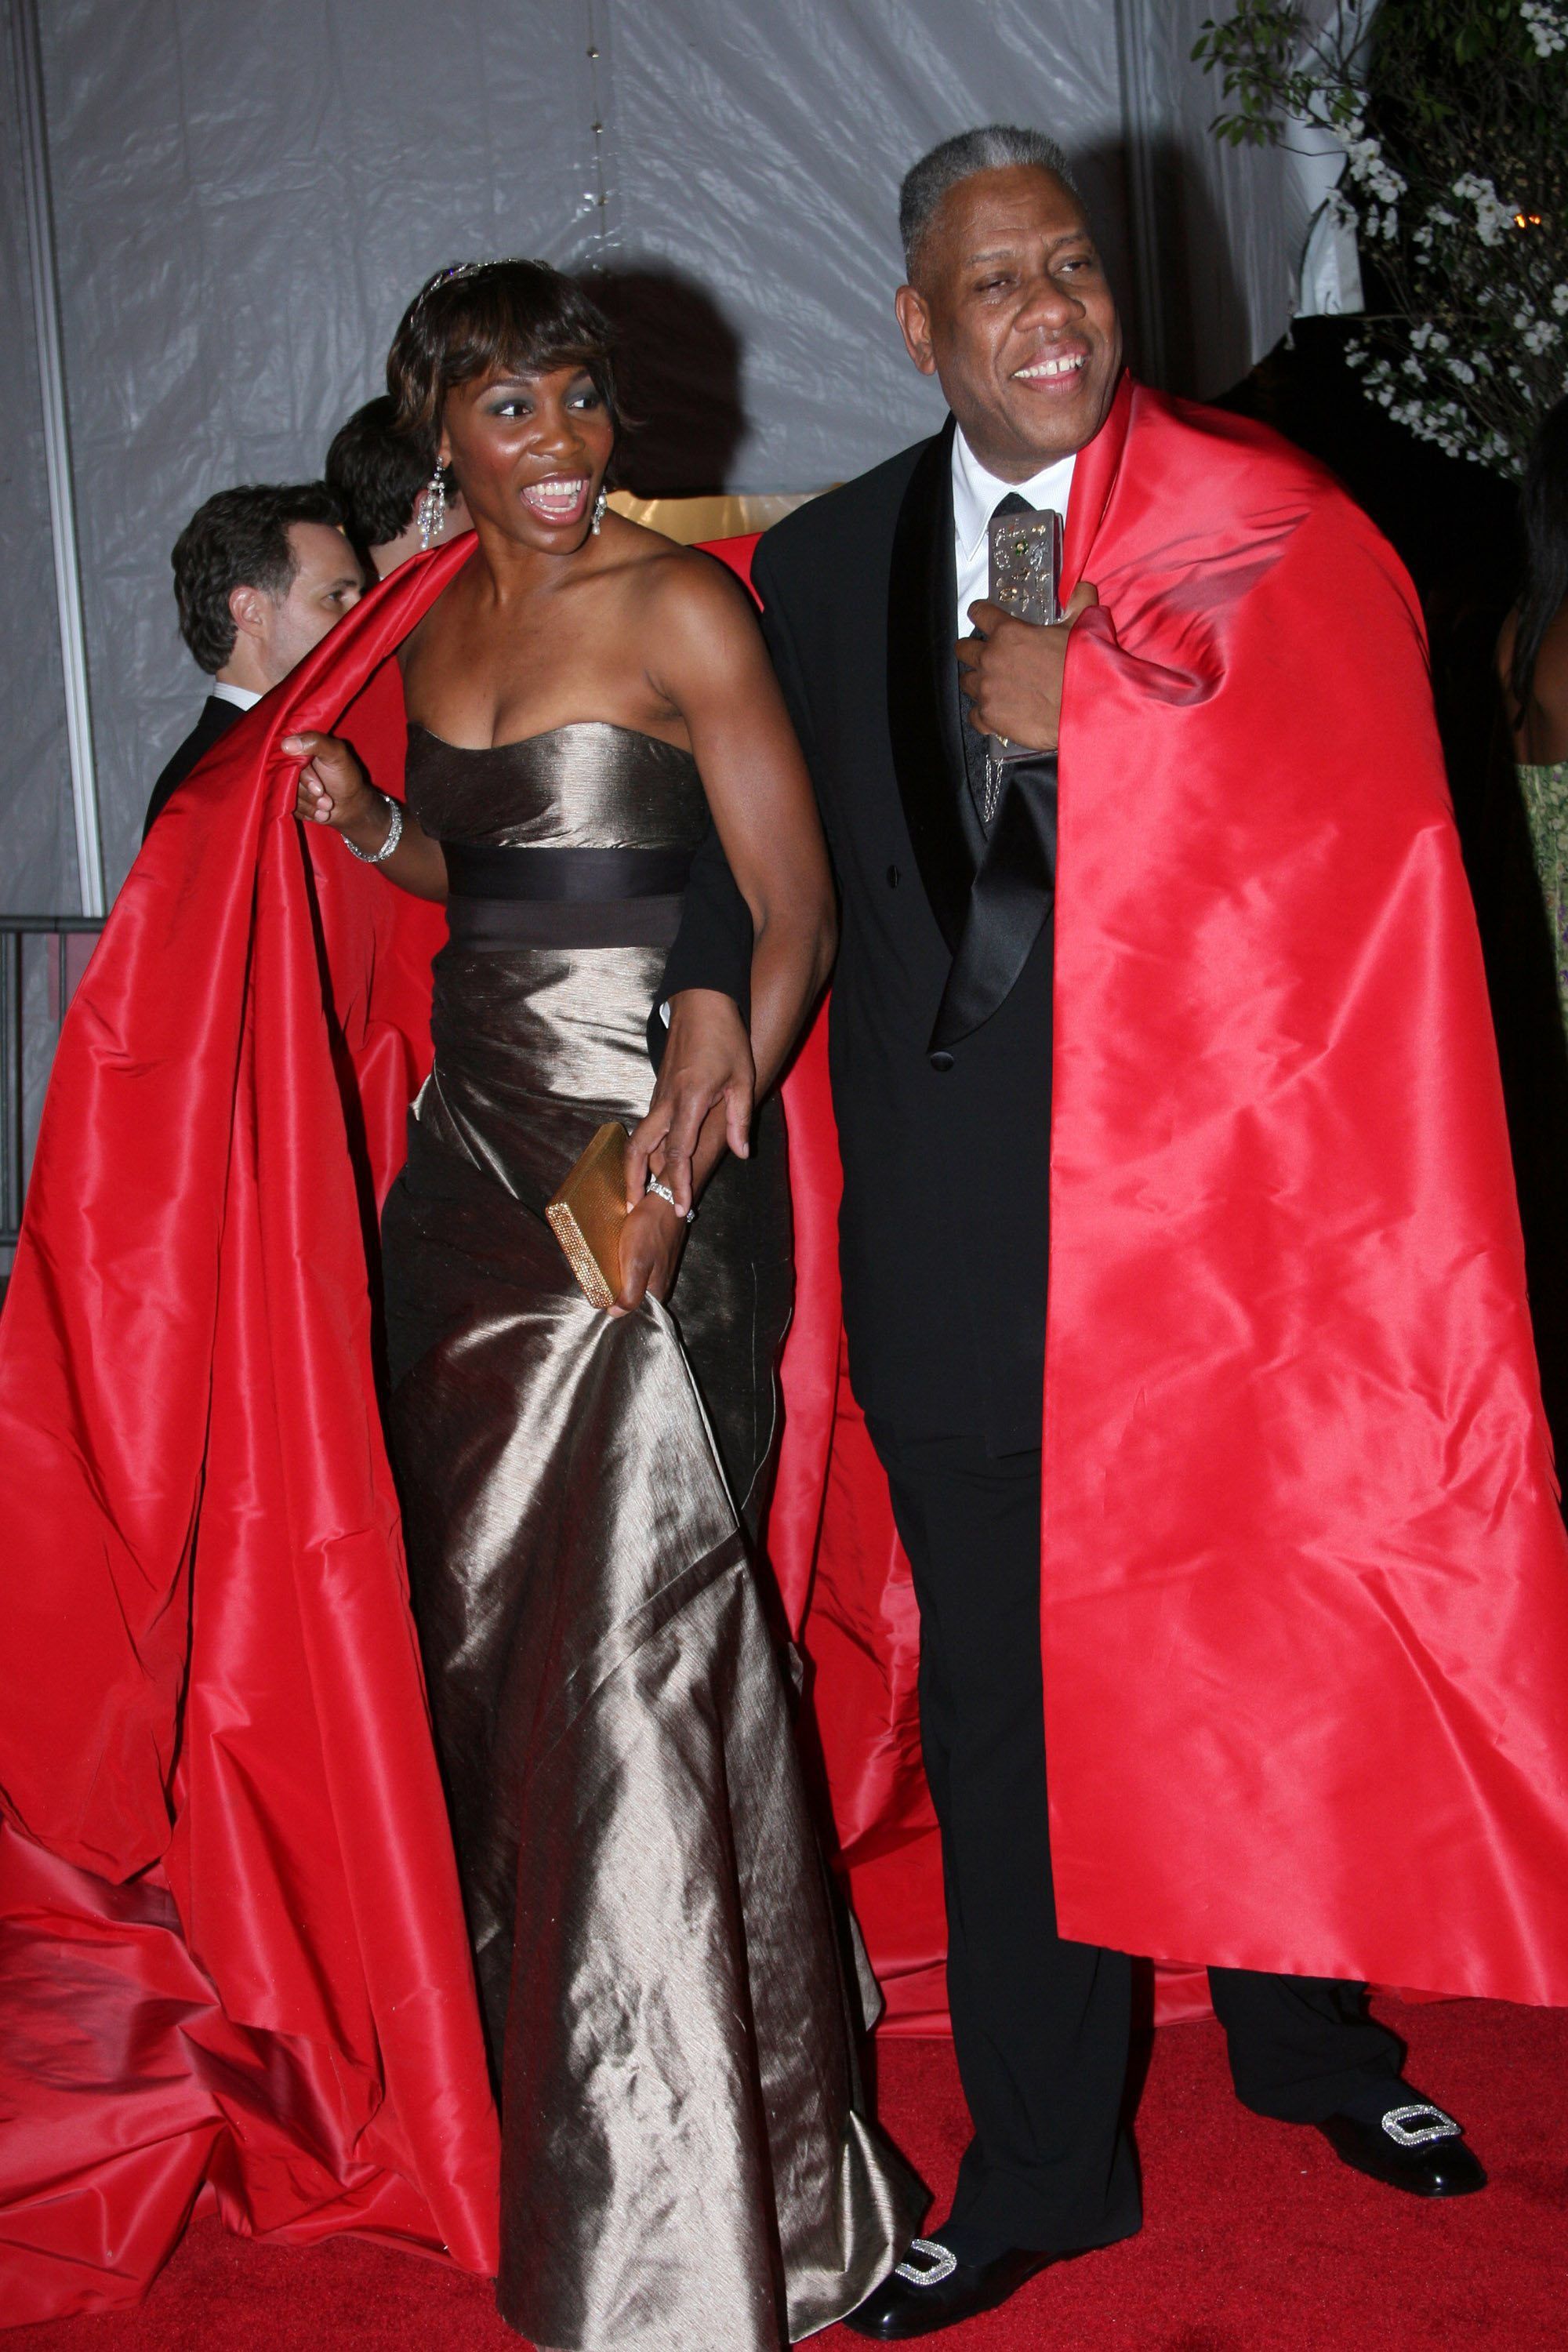 André Leon Talley, Fashion Icon and Trailblazer, Has Died at 73